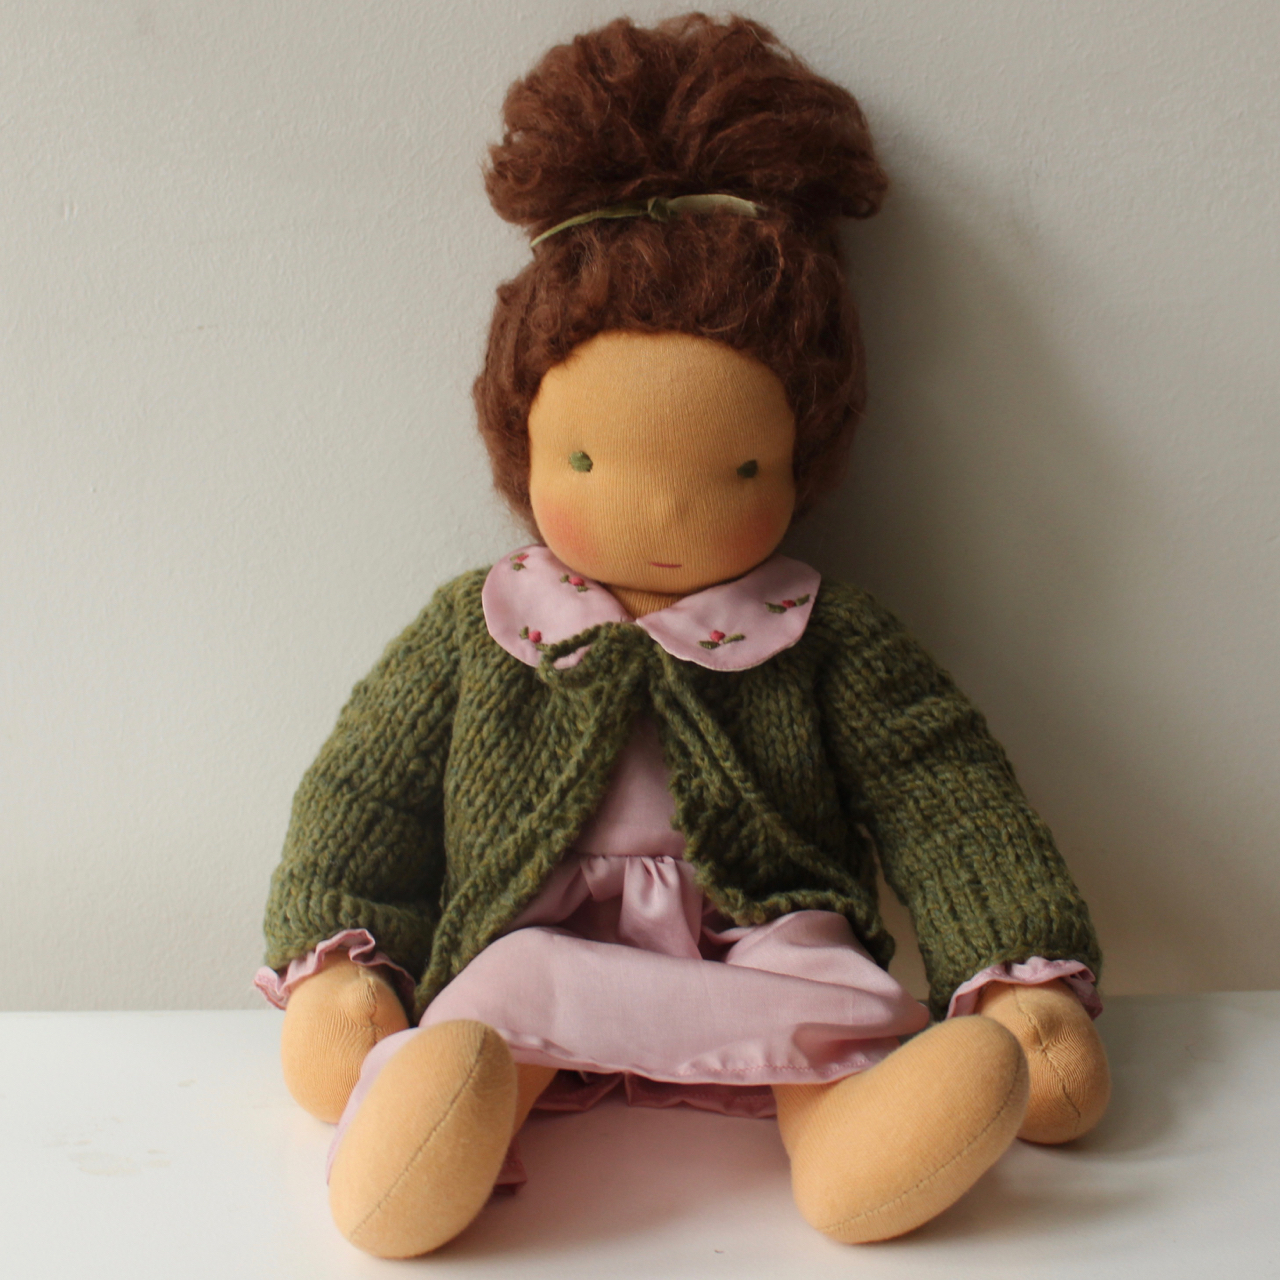 Waldorf doll girl in pink dresss, brown hair, green hand-knitted cardigan, made by feinslieb